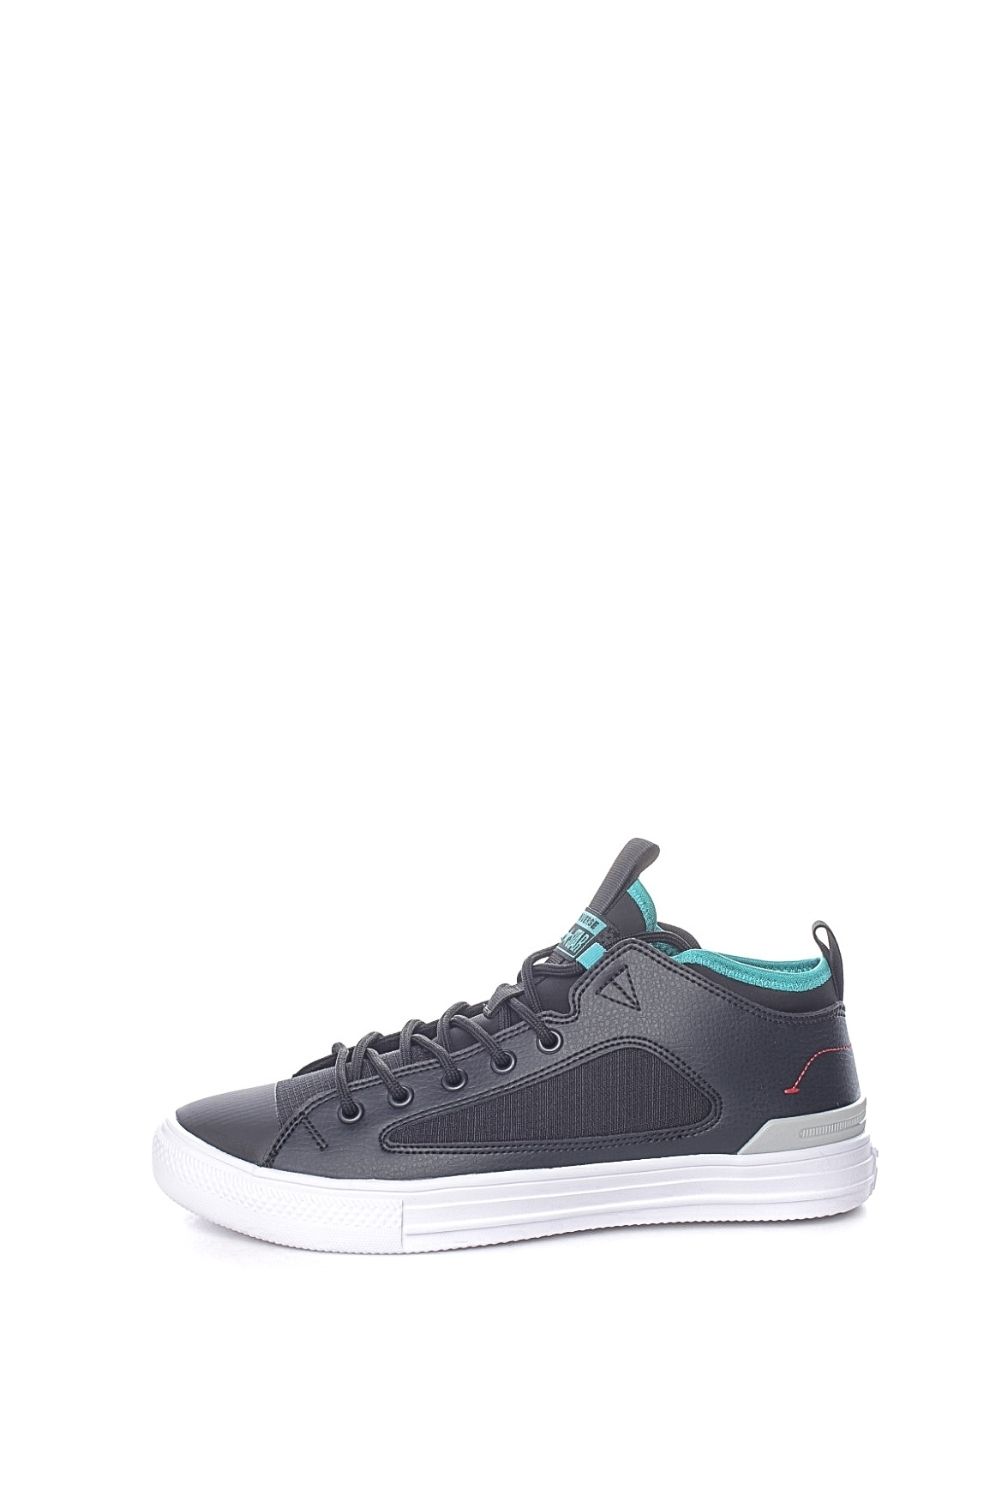 CONVERSE - Unisex sneakers CONVERSE Chuck Taylor AS Ultra Mid μαύρα Γυναικεία/Παπούτσια/Sneakers